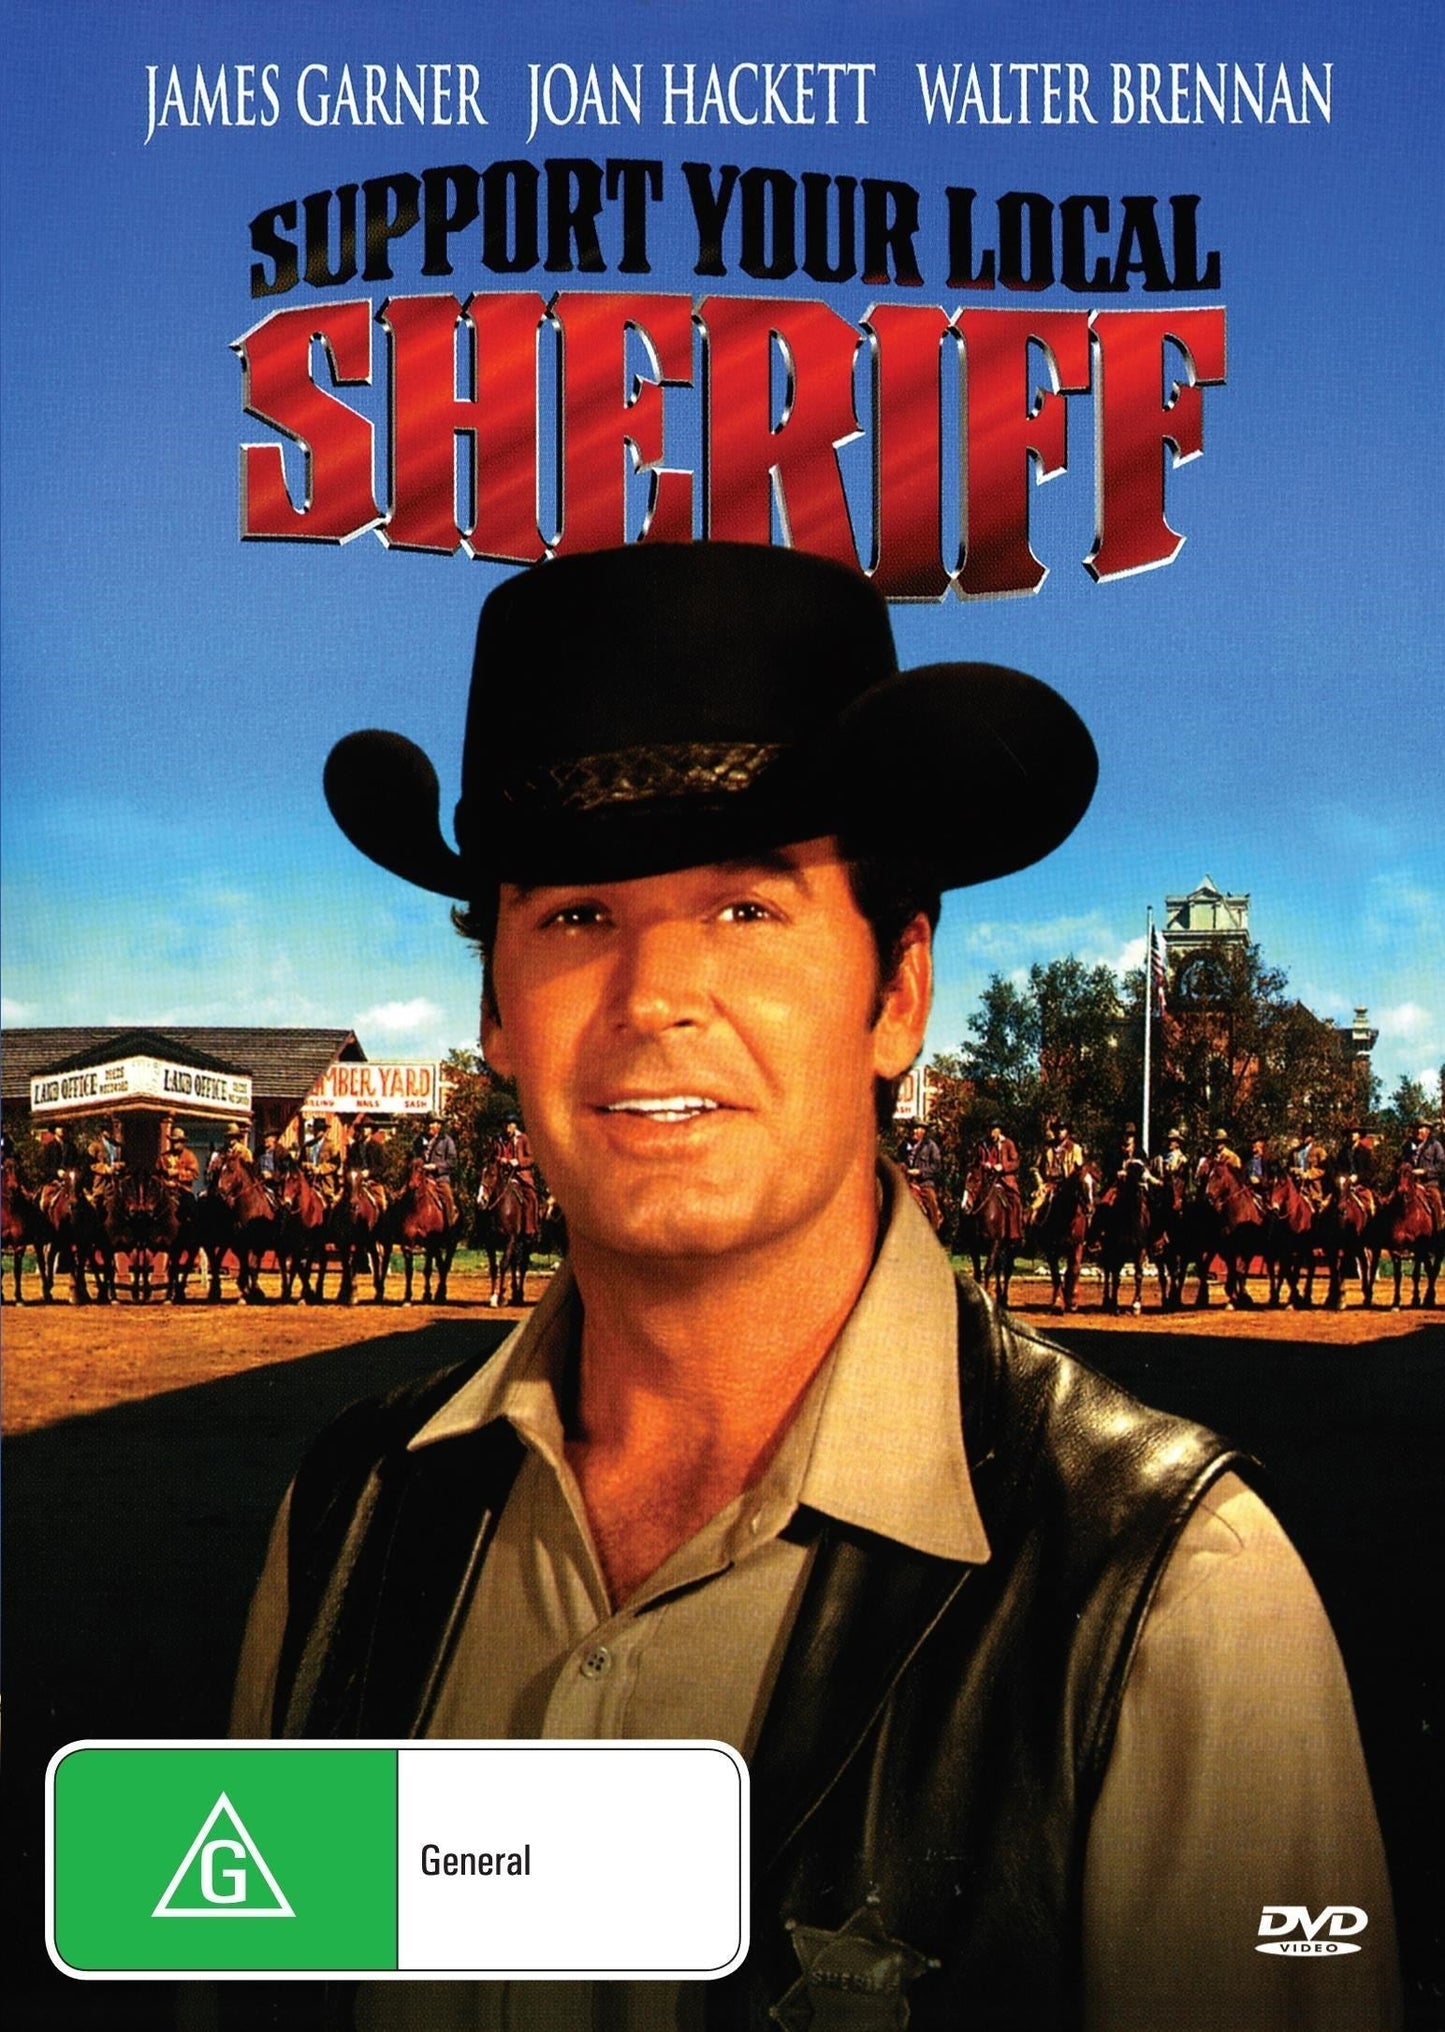 Support Your Local Sheriff! rareandcollectibledvds